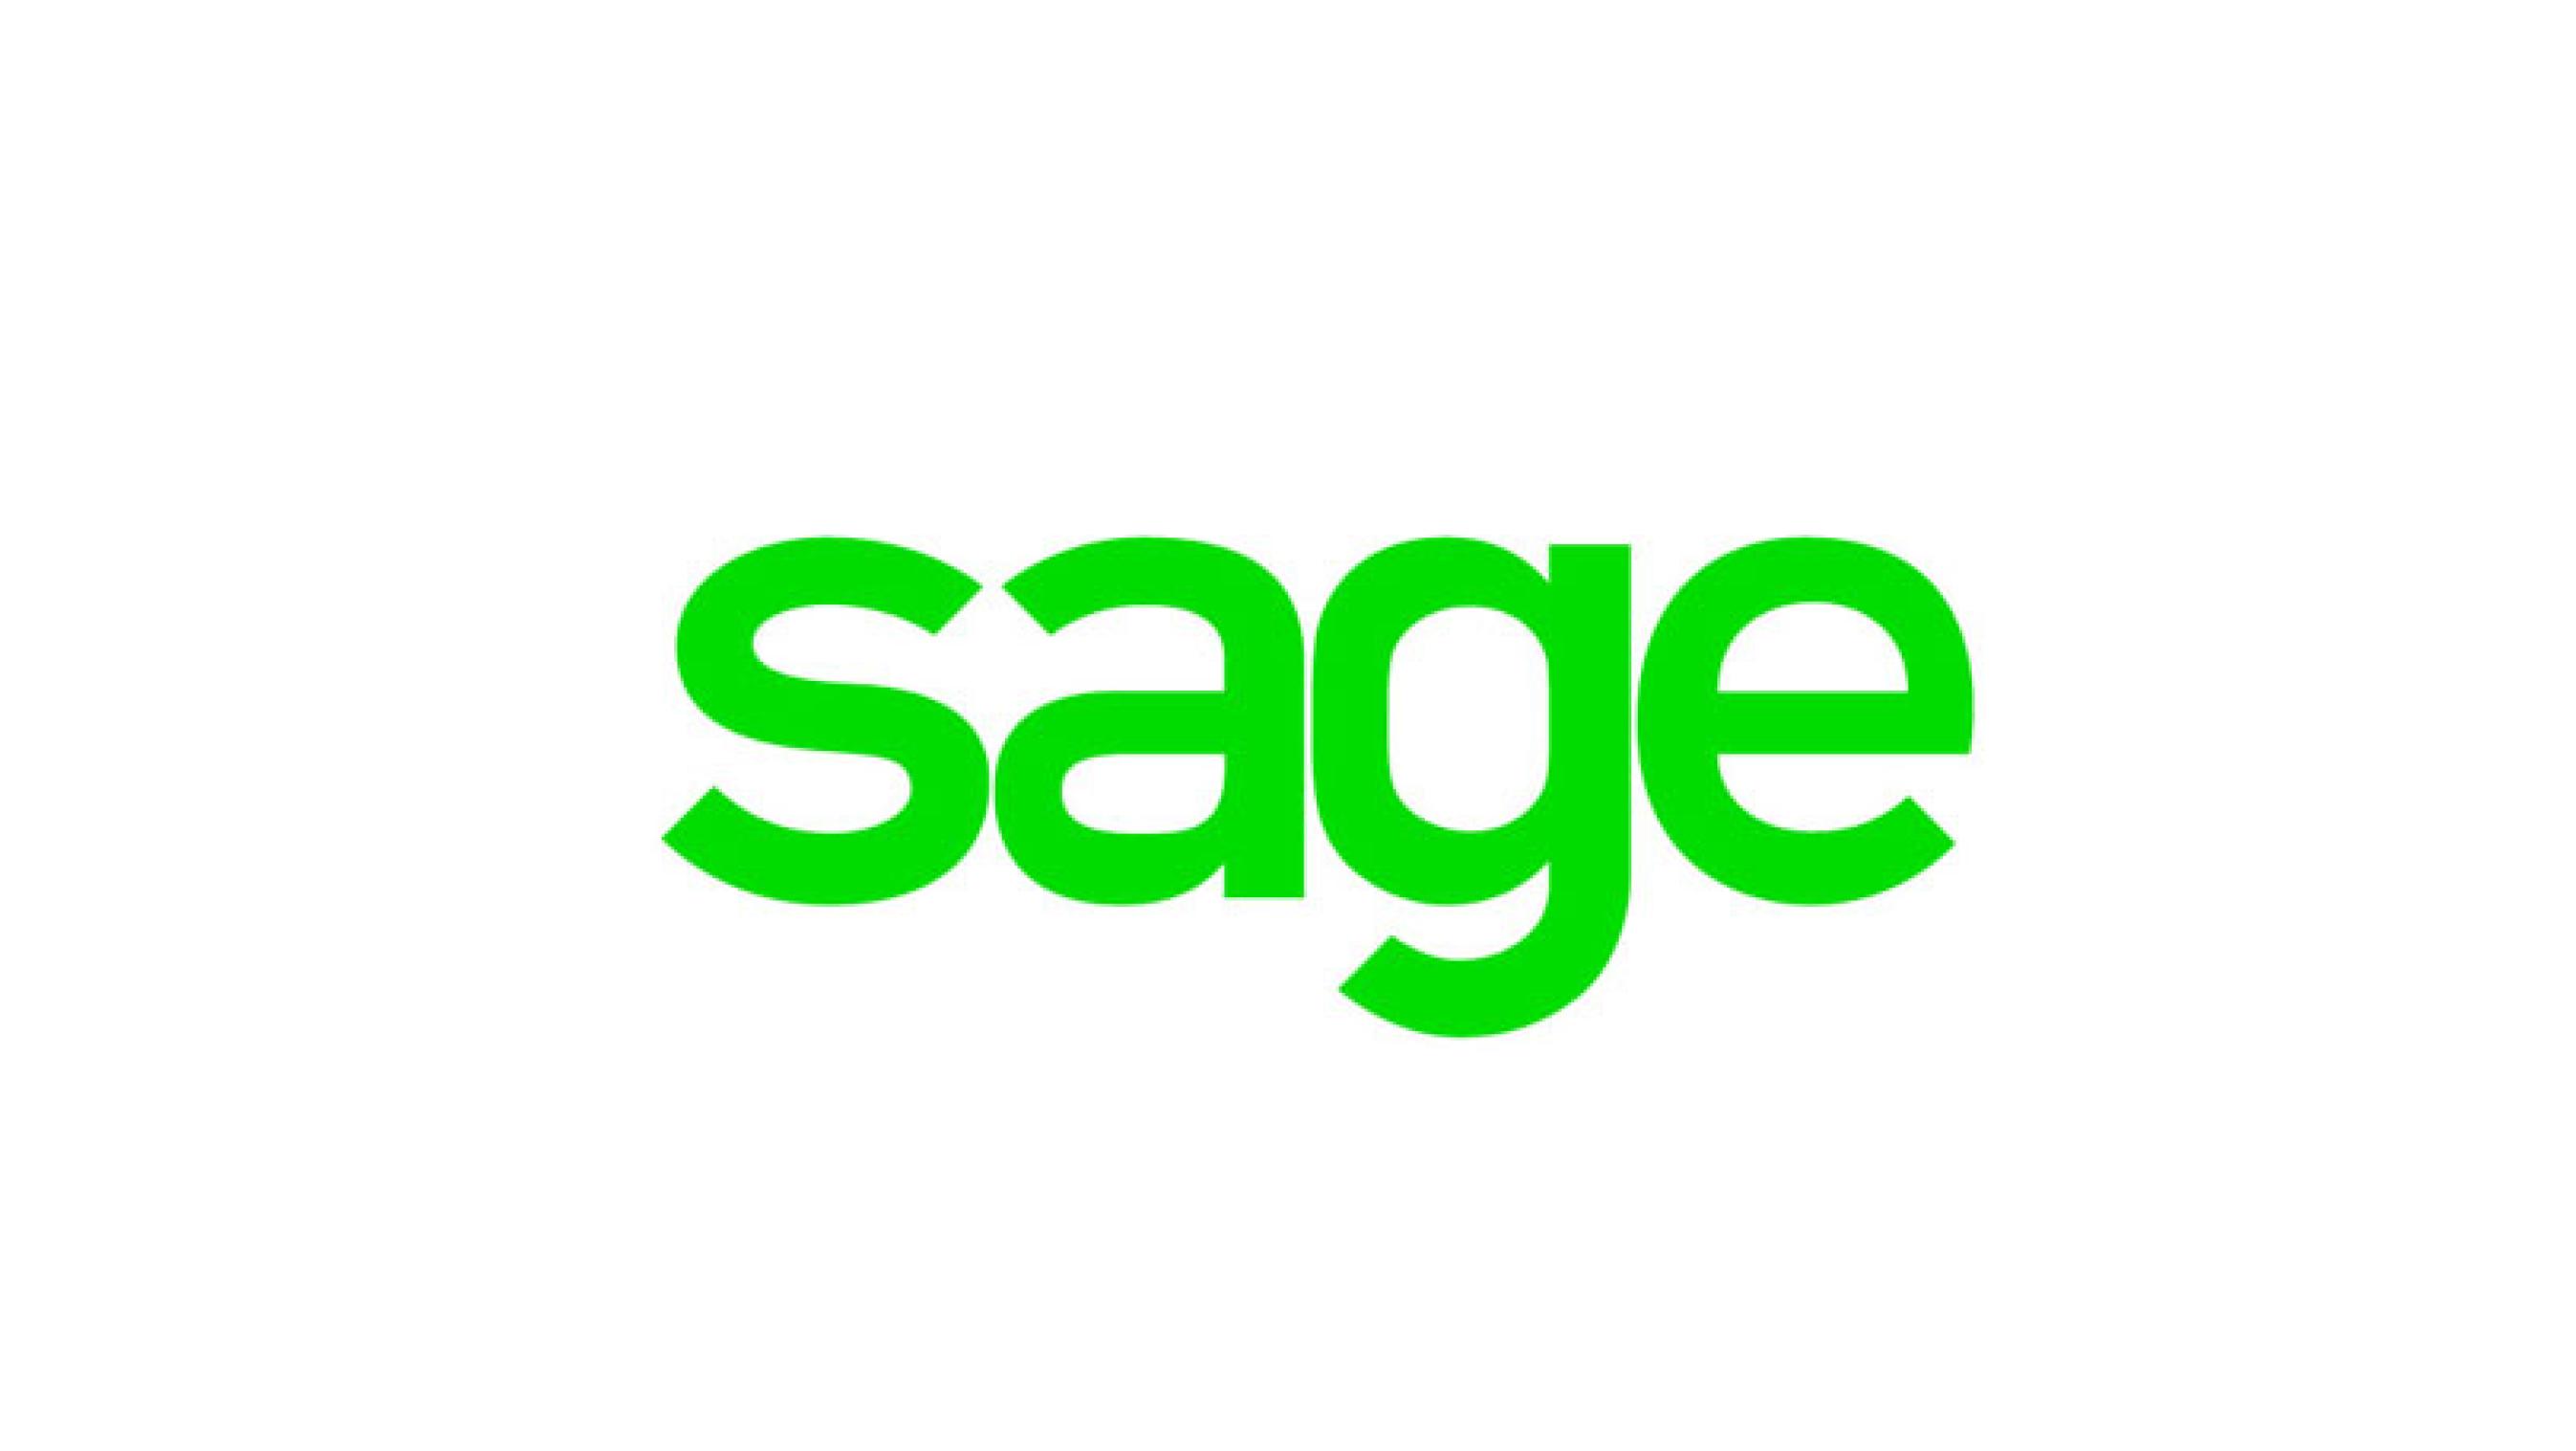 Sage Equips Customers to Create Intelligent Organisations by Embracing Digital Transformation with Sage Intacct 2020